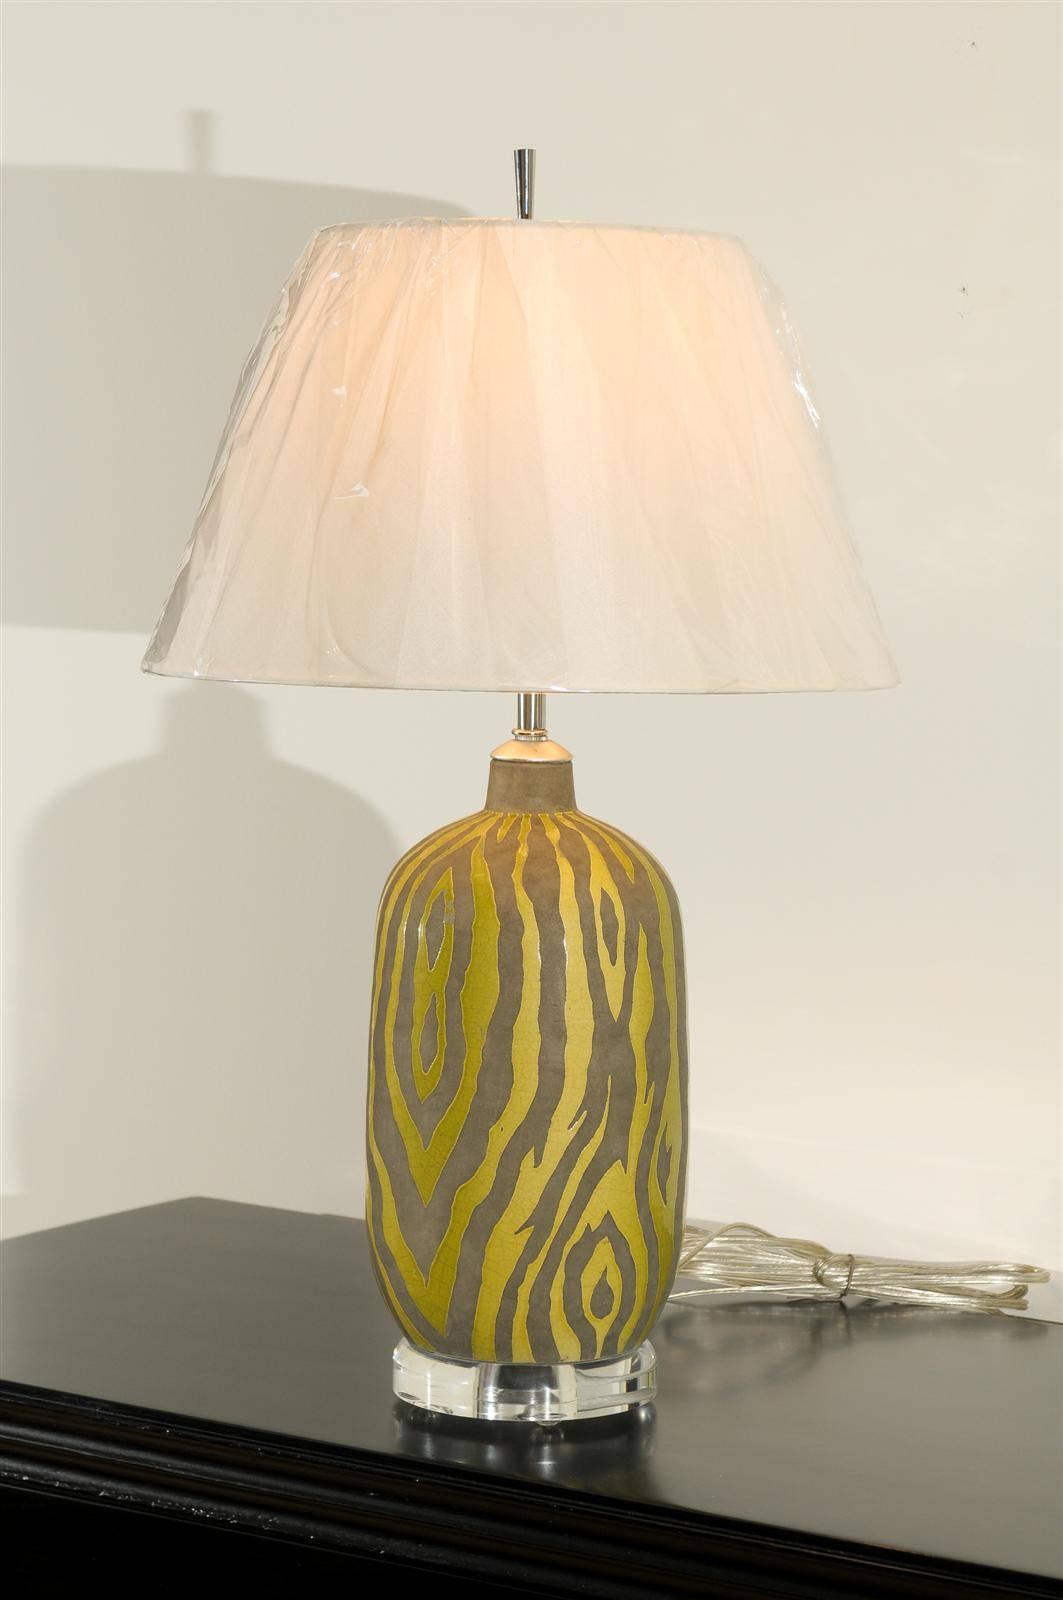 A fabulous pair of vintage ceramic lamps. Crisp zebra print executed in a citrus glaze. Beautiful weight and craftsmanship. While the lamps are unmarked, they are consistent with Italian ceramic production of the early 1970s. Stylish jewelry!